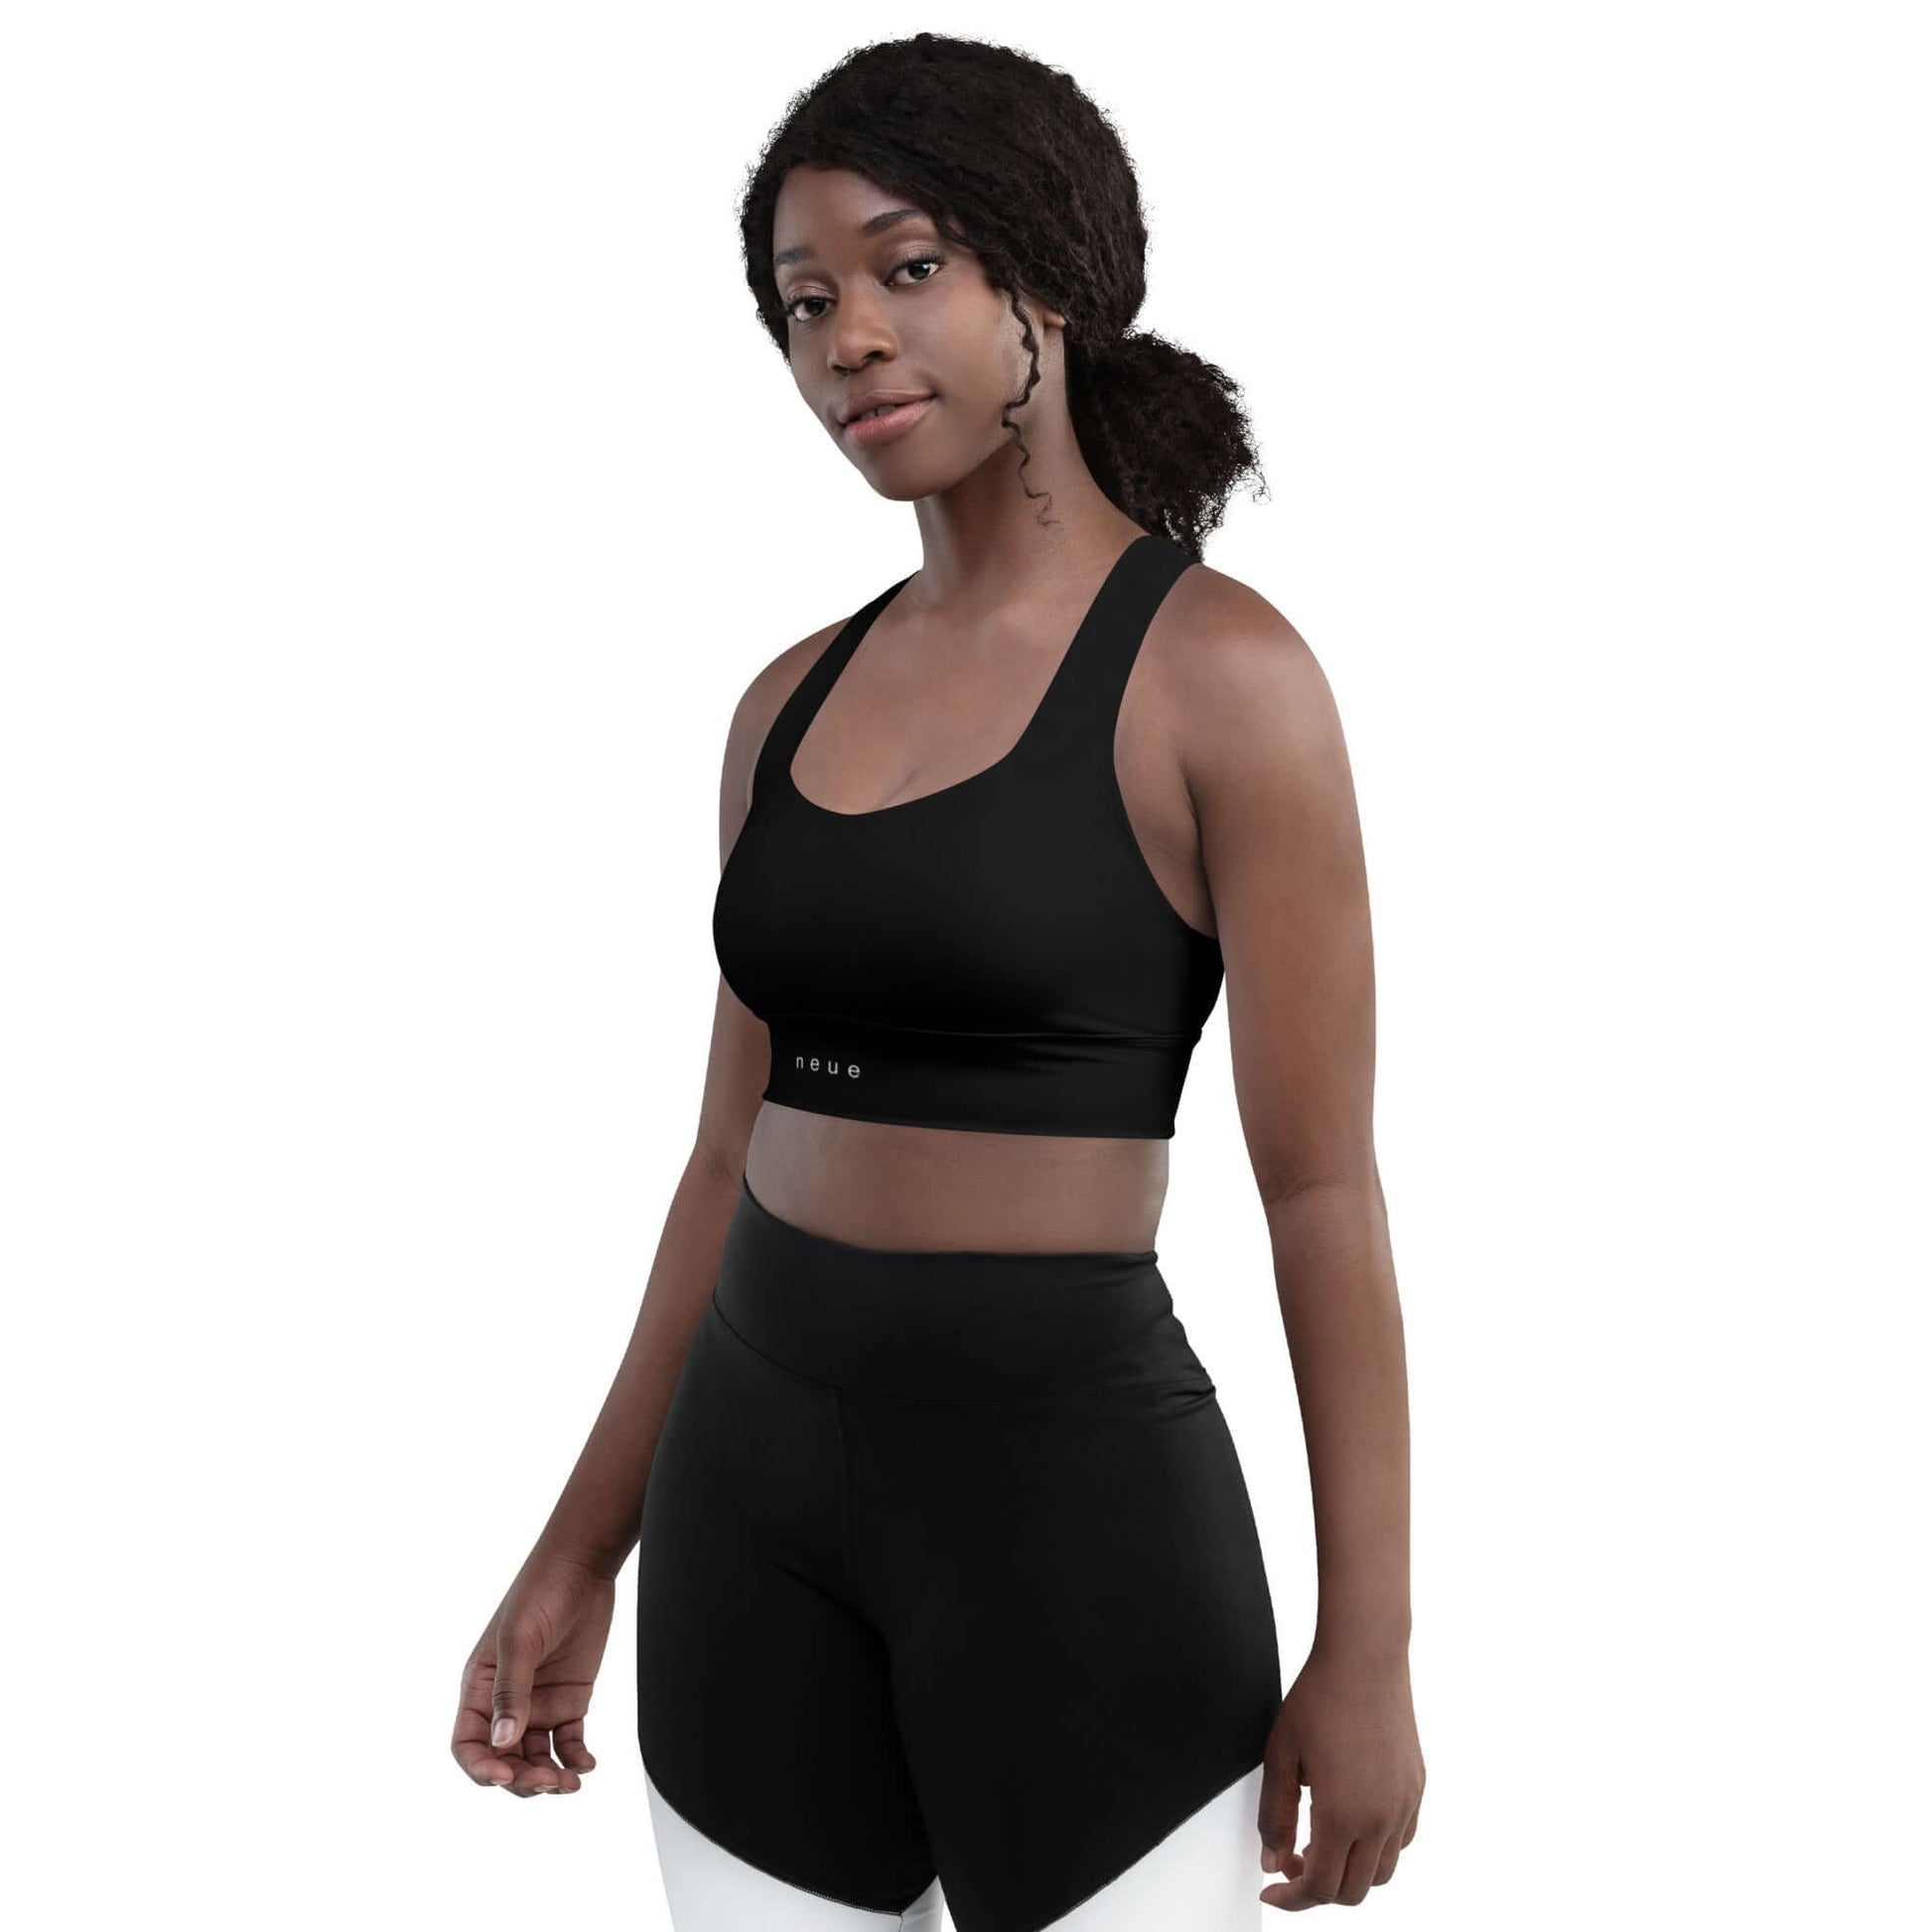 Woman wears Neue Supply Co. Longline Sports Bra in Black. 3/4 view of model looking into camera with white background.